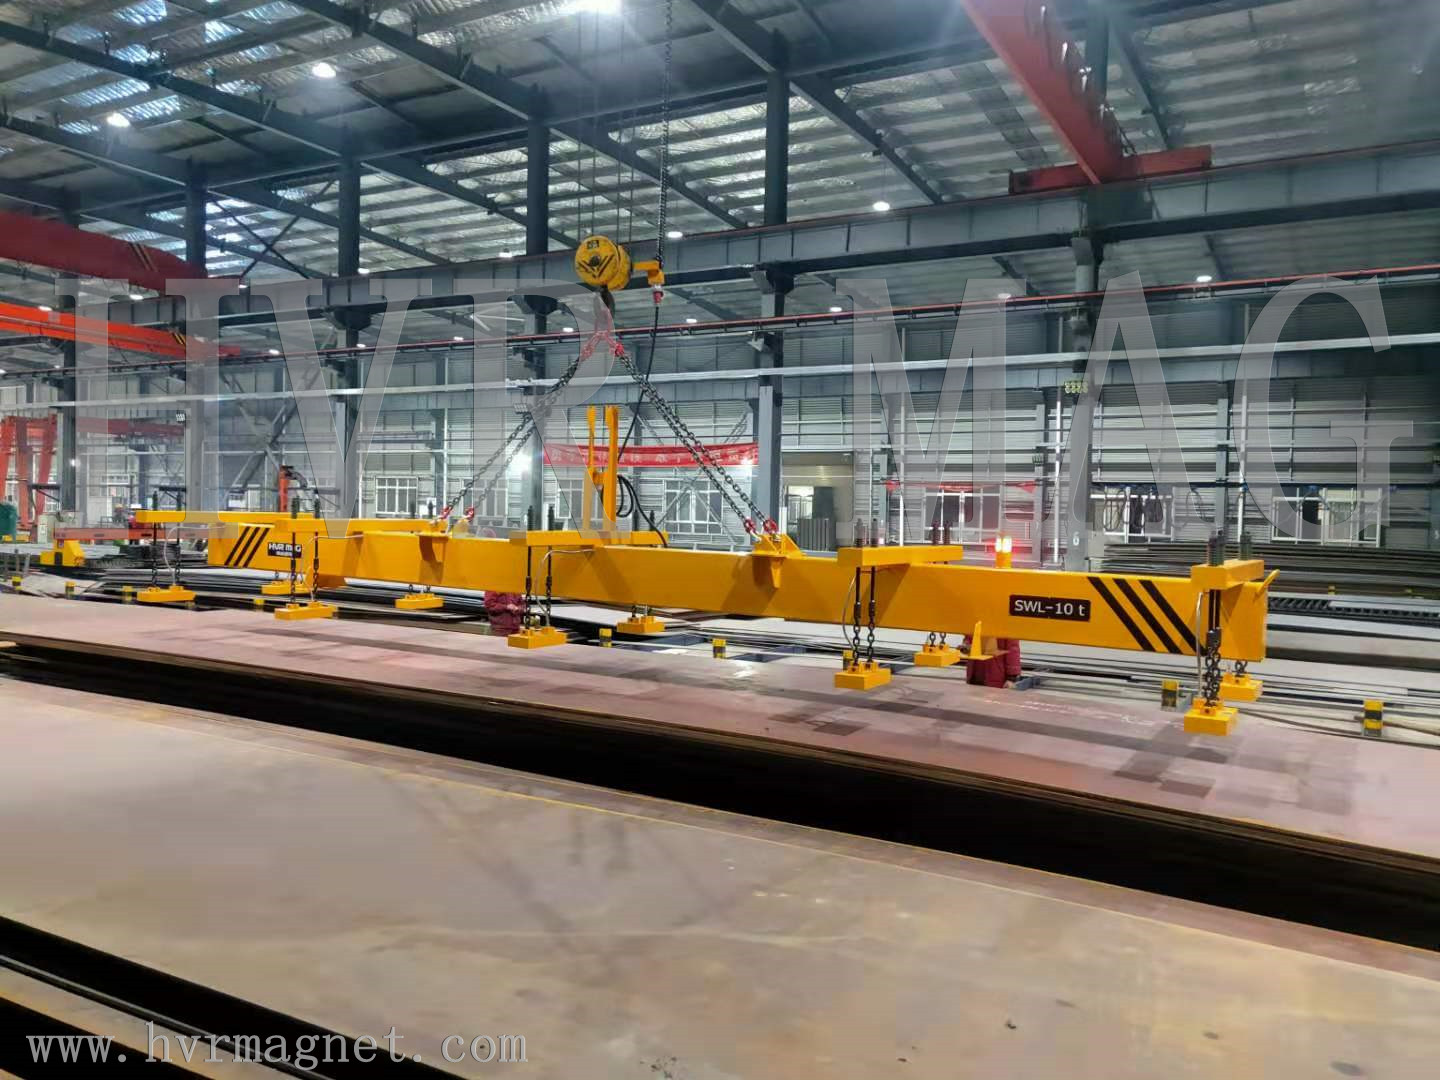 Magnetic lifting of thin steel plate with overhead hoisting crane - HVR MAG